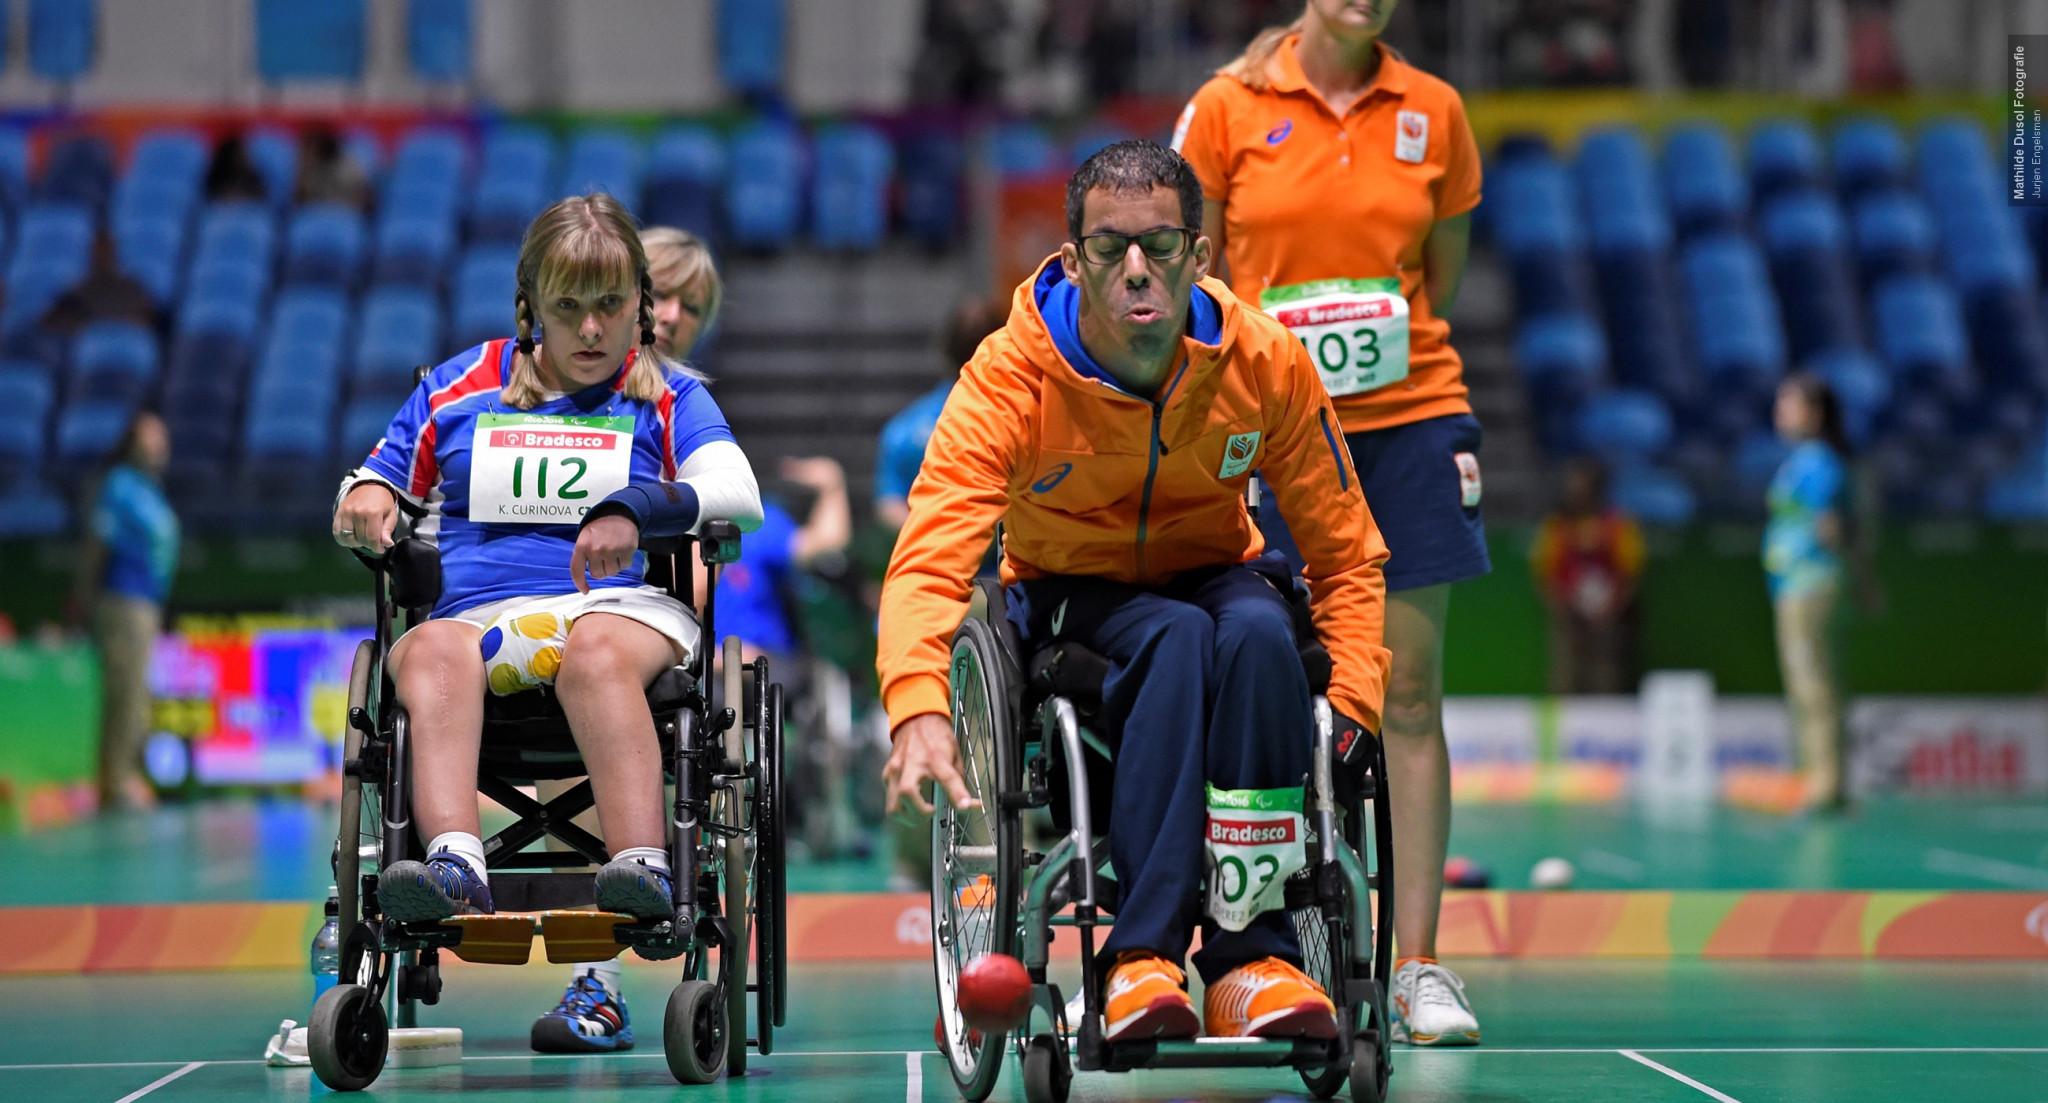 Paralympic silver medallist Daniel Perez of the Netherlands beat Slovakia's Tomas Kral to claim BC1 gold in Montreal ©TeamNL/Twitter